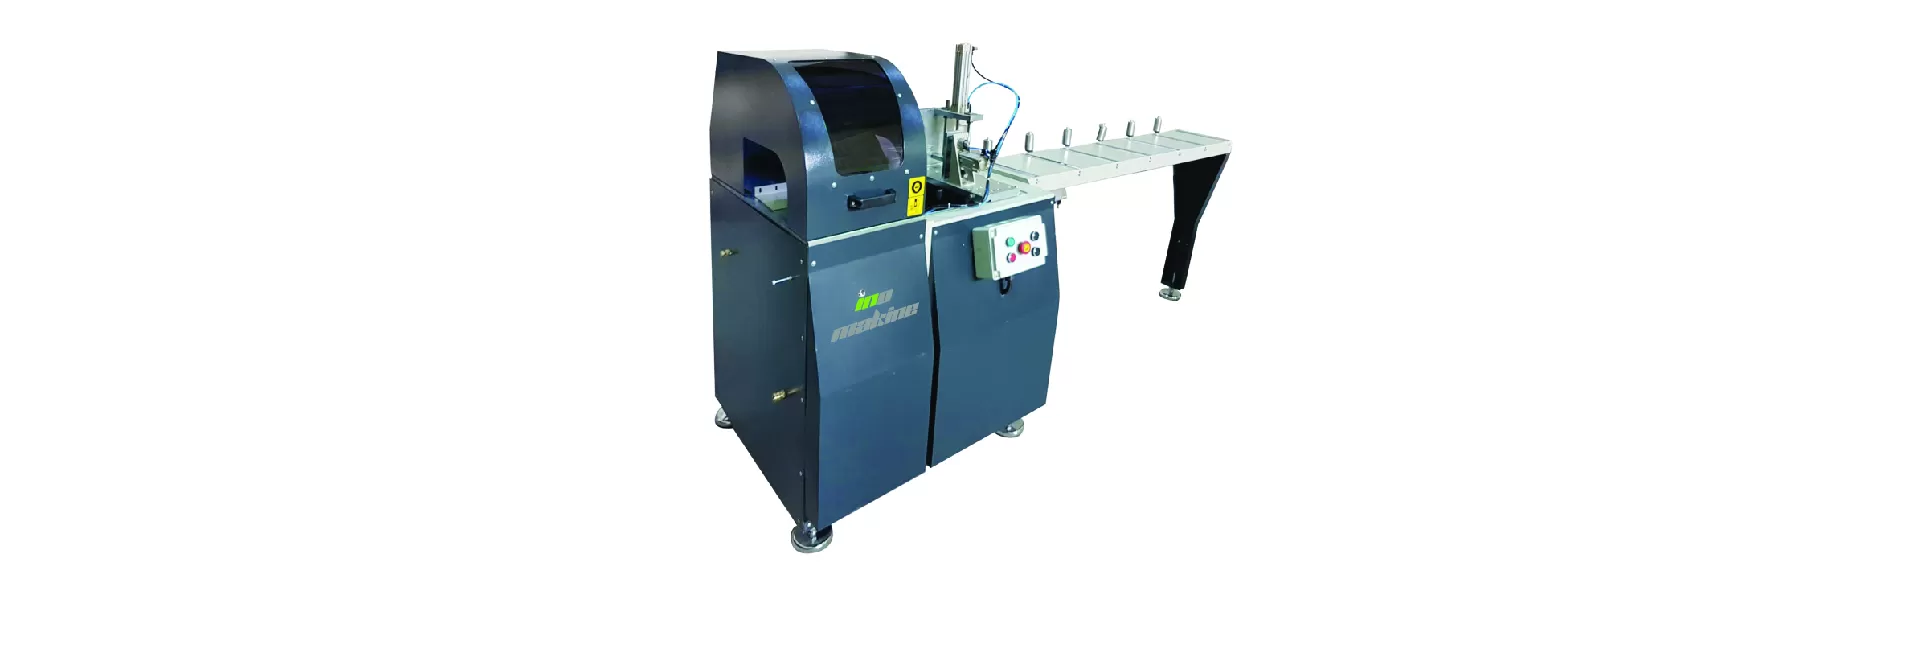 AS 489 Automatic Cutting Saw with Pneumatic Feed